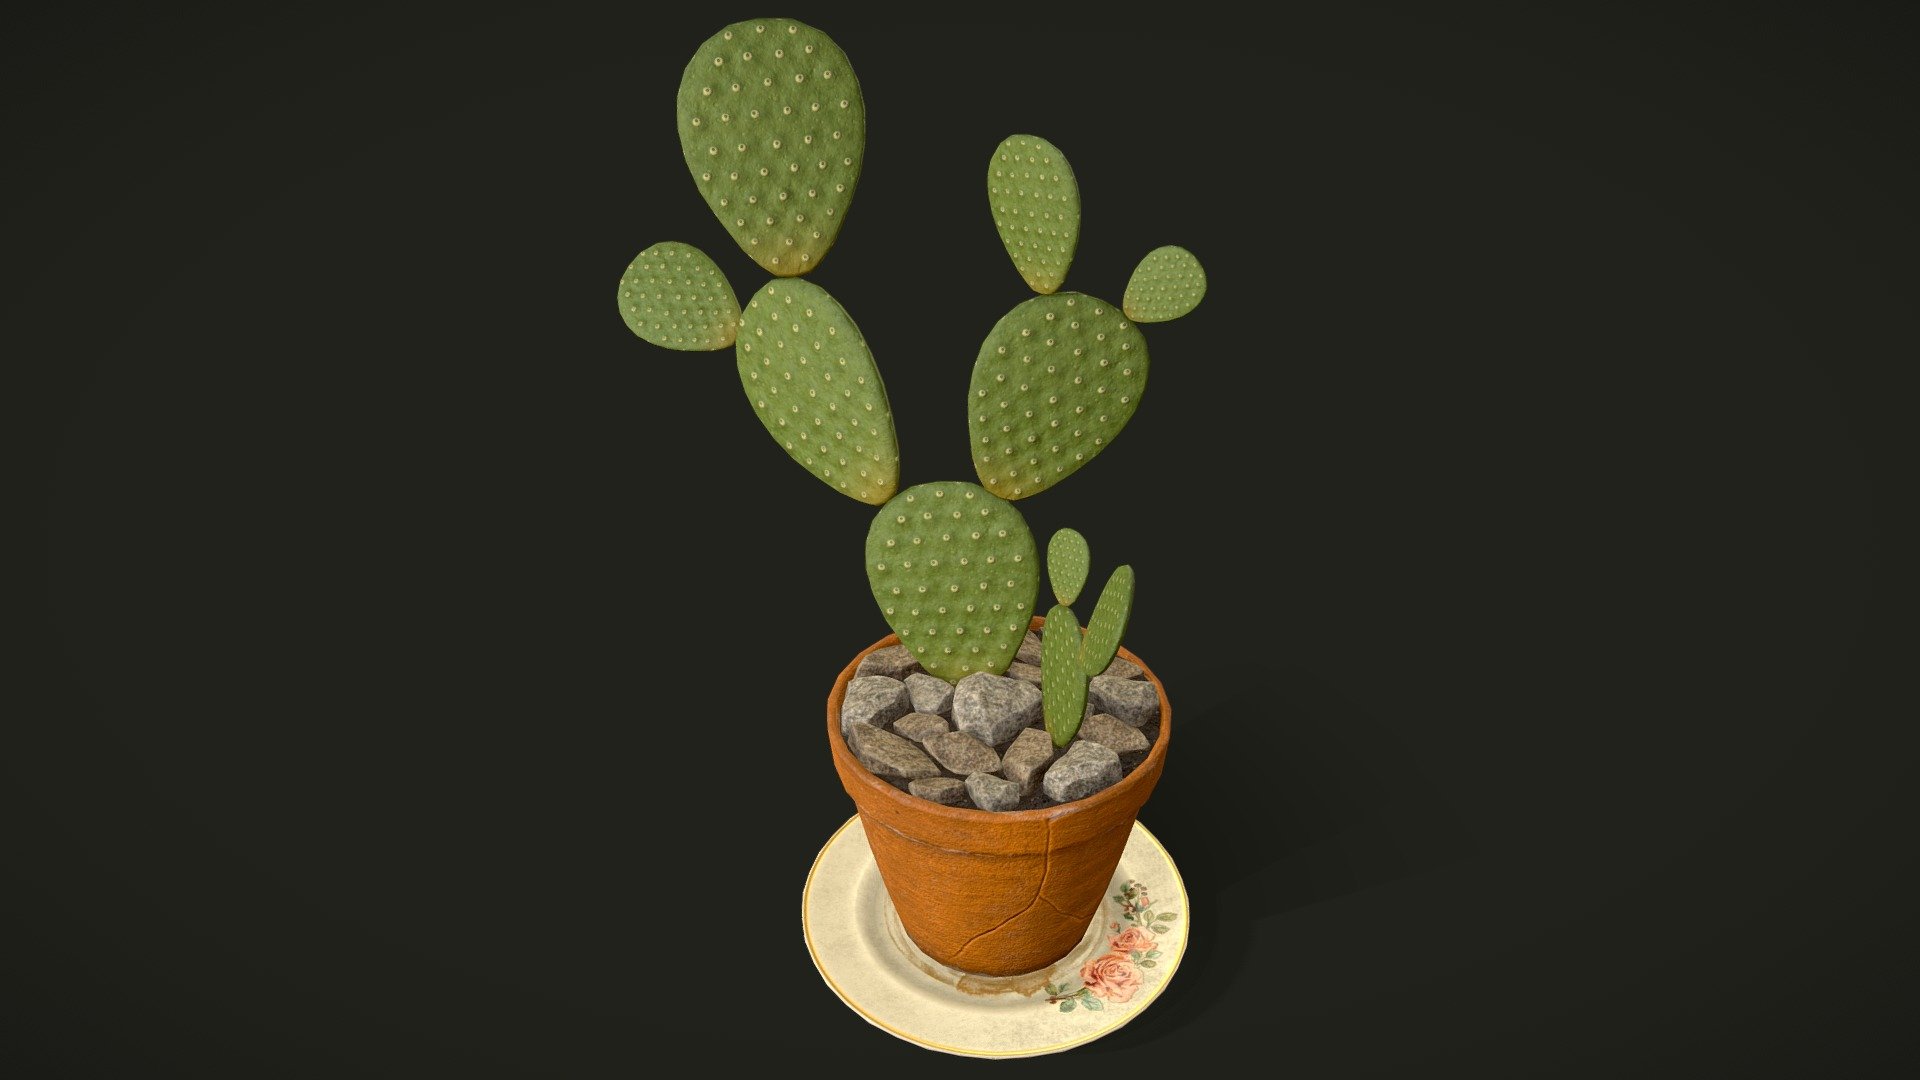 House Cactus Plant it's a lowpoly game ready model with unwrapped UVs and PBR textures.

Normal map was baked from a high poly model.

UVs: channel 1: overlapping; channel 2: non-overlapping (for baking lightmaps).

Formats: FBX, Obj. Marmoset Toolbag scene 3.08 (.tbscene)  Textures format: TGA. Textures resolution: 2048x2048px.

Textures set includes:




Metal_Roughness: BaseColor, Roughness, Metallic, Normal, Height, AO.

Unity 5 (Standart Metallic): AlbedoTransparency, AO, Normal, MetallicSmoothness

Unreal Engine 4: BaseColor, OcclusionRoughnessMetallic, Normal.



Artstation: https://www.artstation.com/tatianagladkaya

Instagram: https://www.instagram.com/t.gladkaya_ - House Cactus Plant - Cactus_01 - 3D model by Tatiana Gladkaya (@tatiana_gladkaya) 3d model